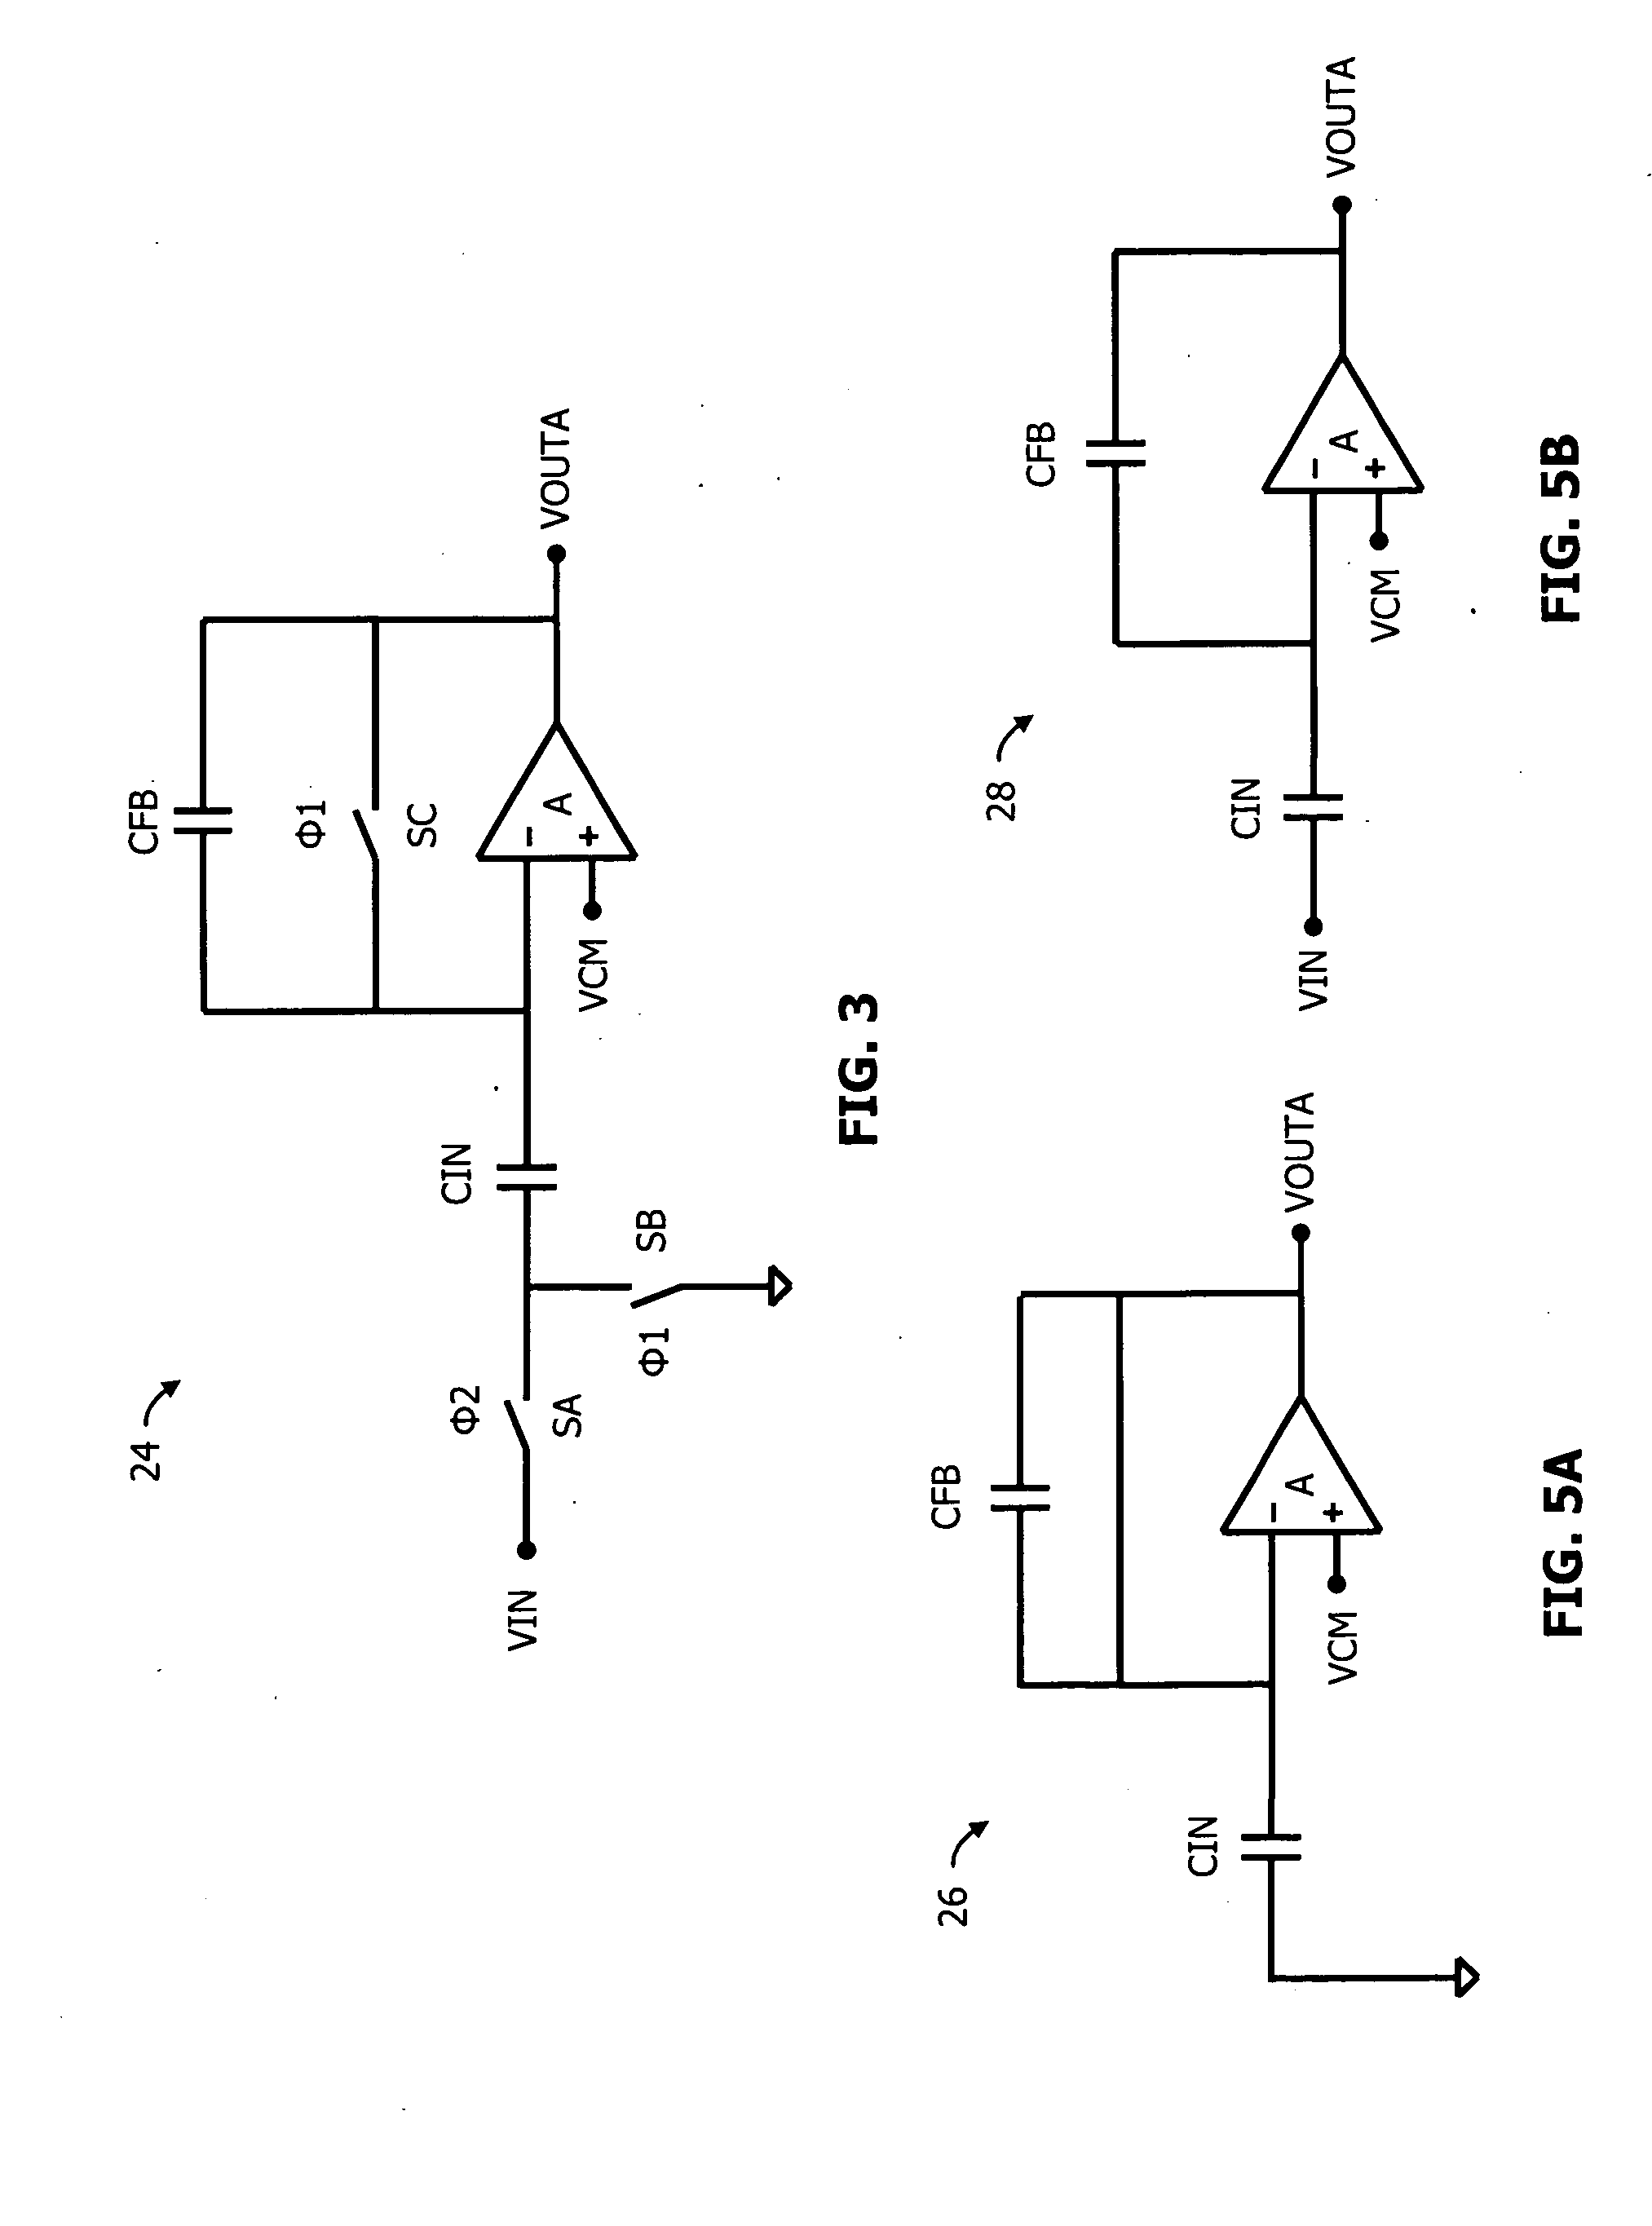 Switched-capacitor circuit having switch-less feedback path